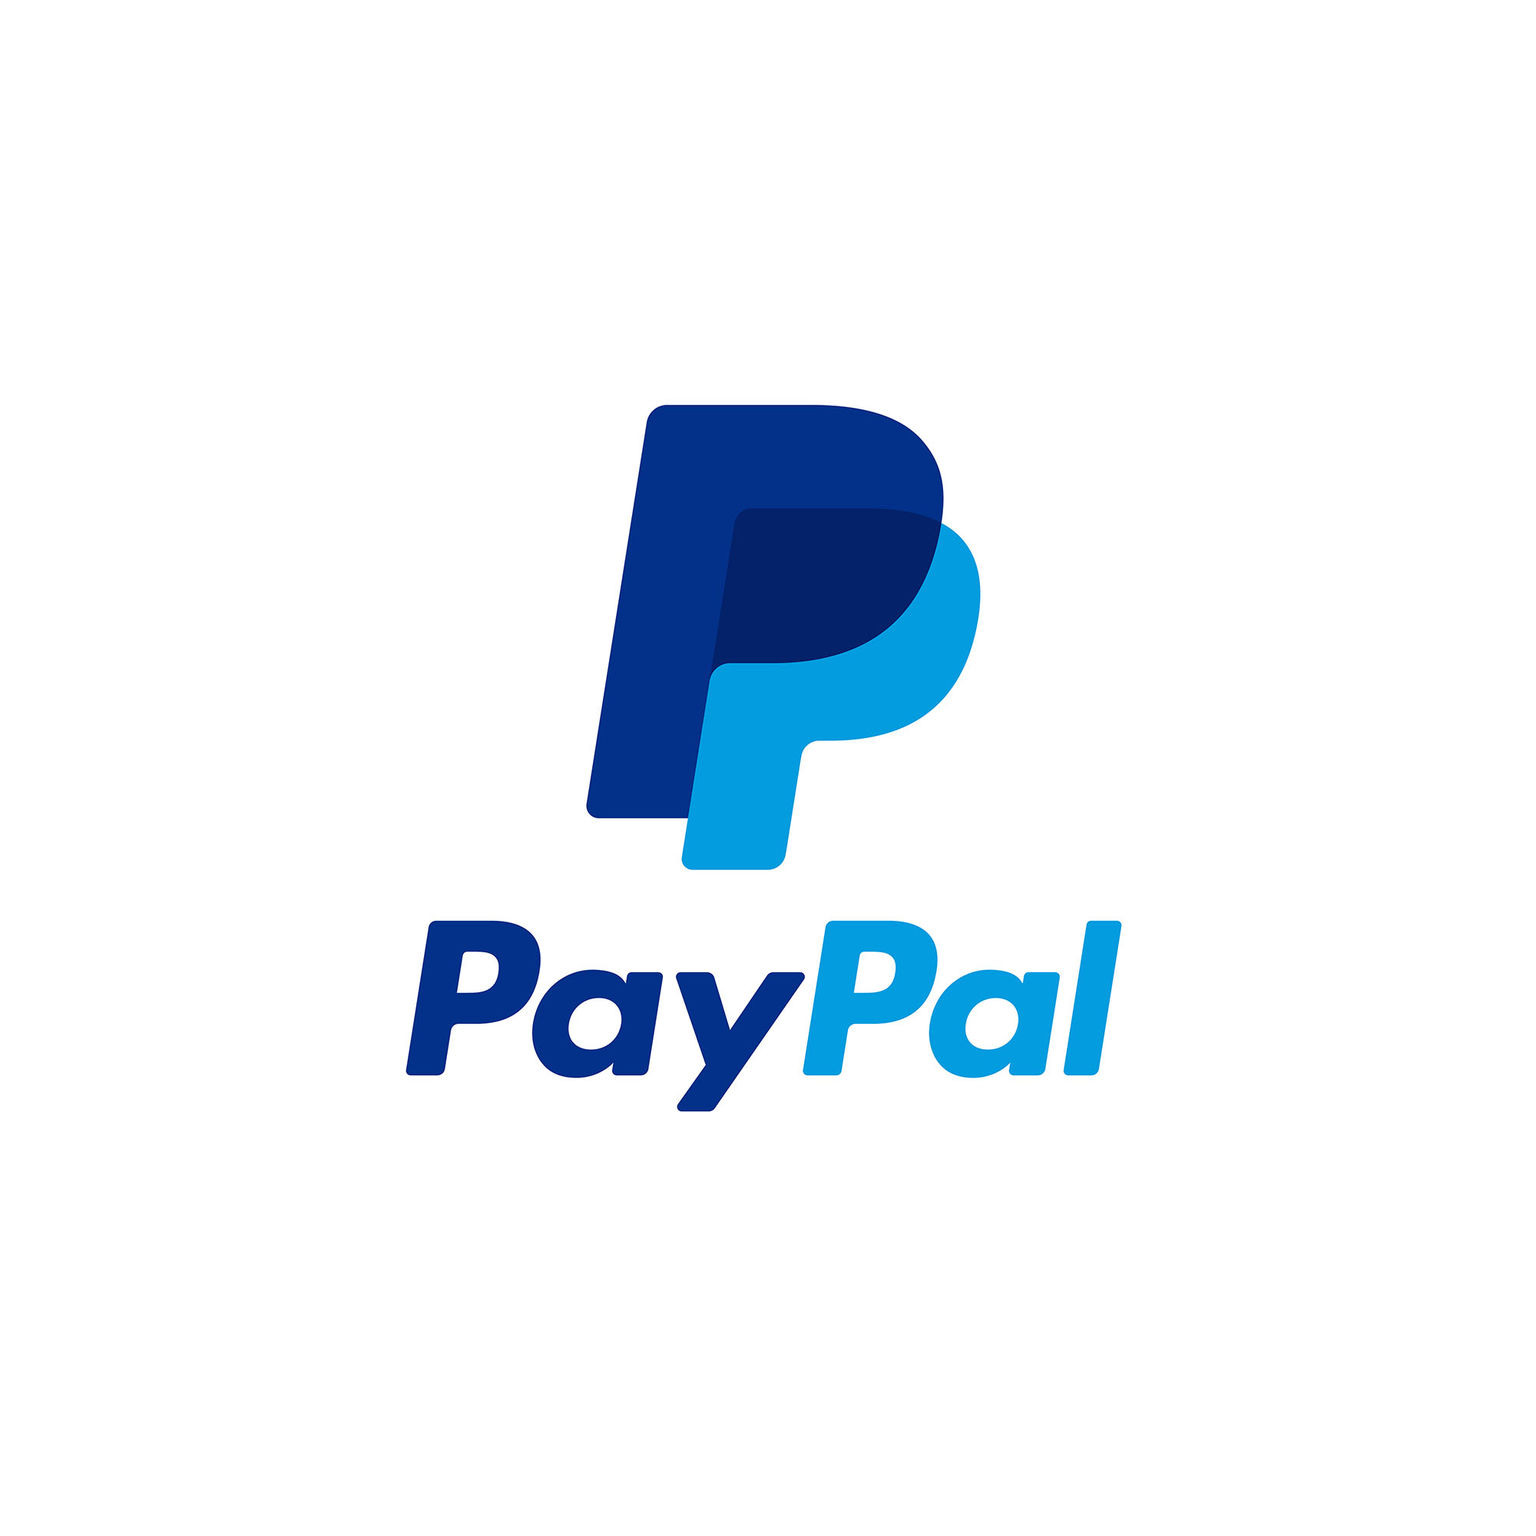 PayPal Rebrand - Entry - iF WORLD DESIGN GUIDE